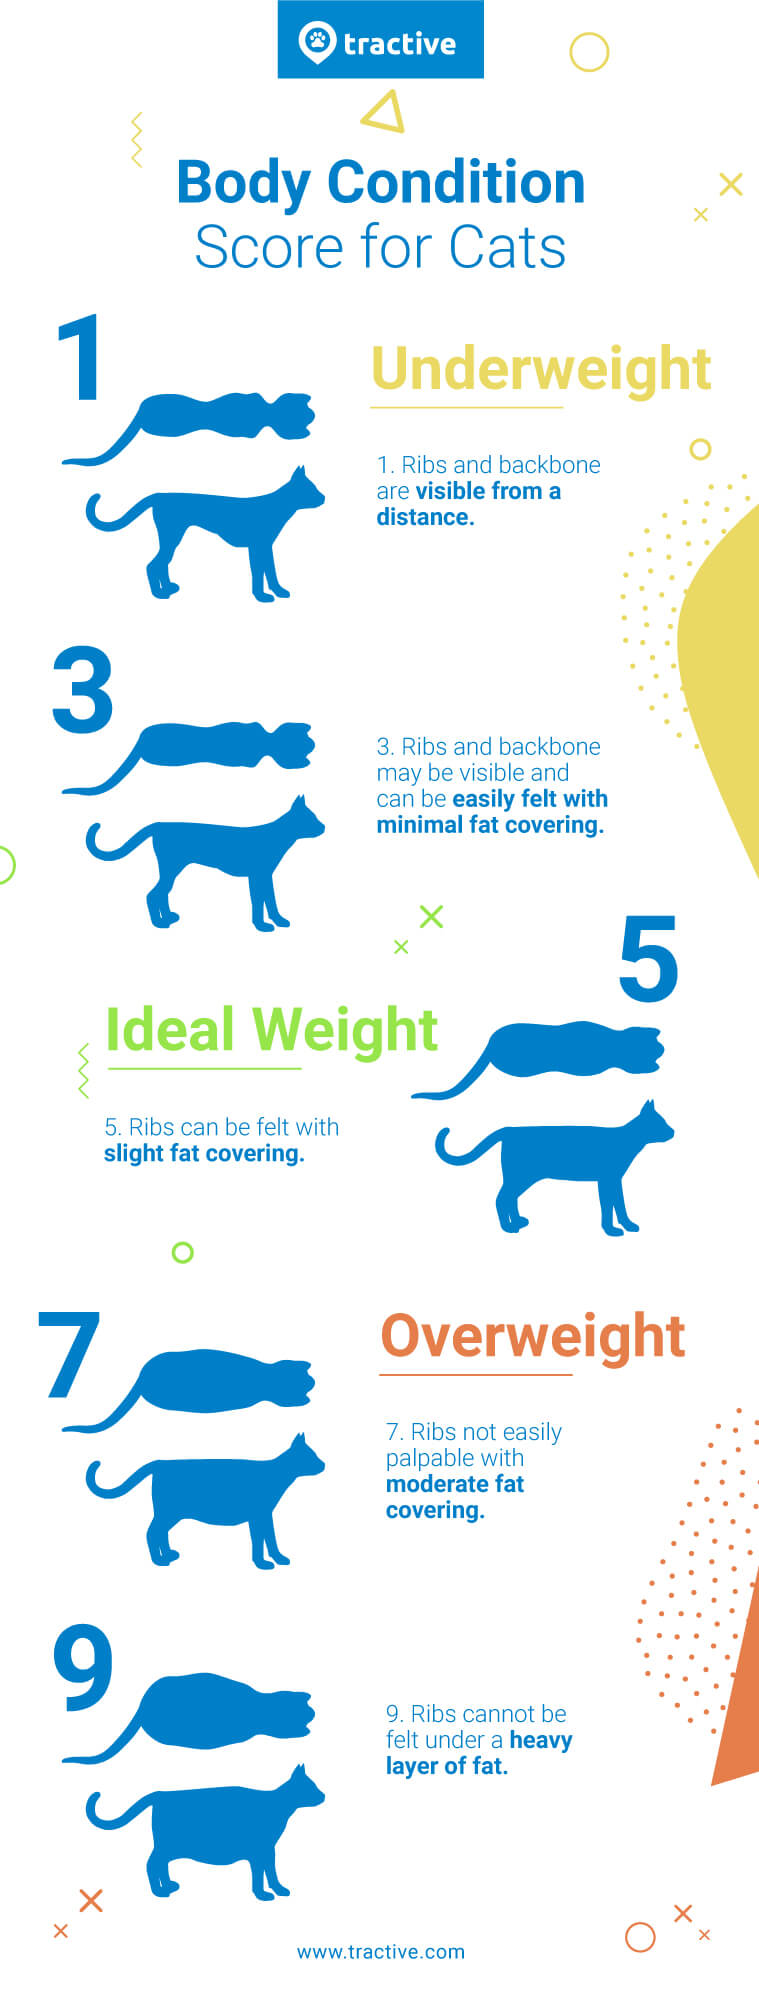 Cat Body Condition Score chart illustrated by Tractive - Underweight, ideal cat weight, overweight